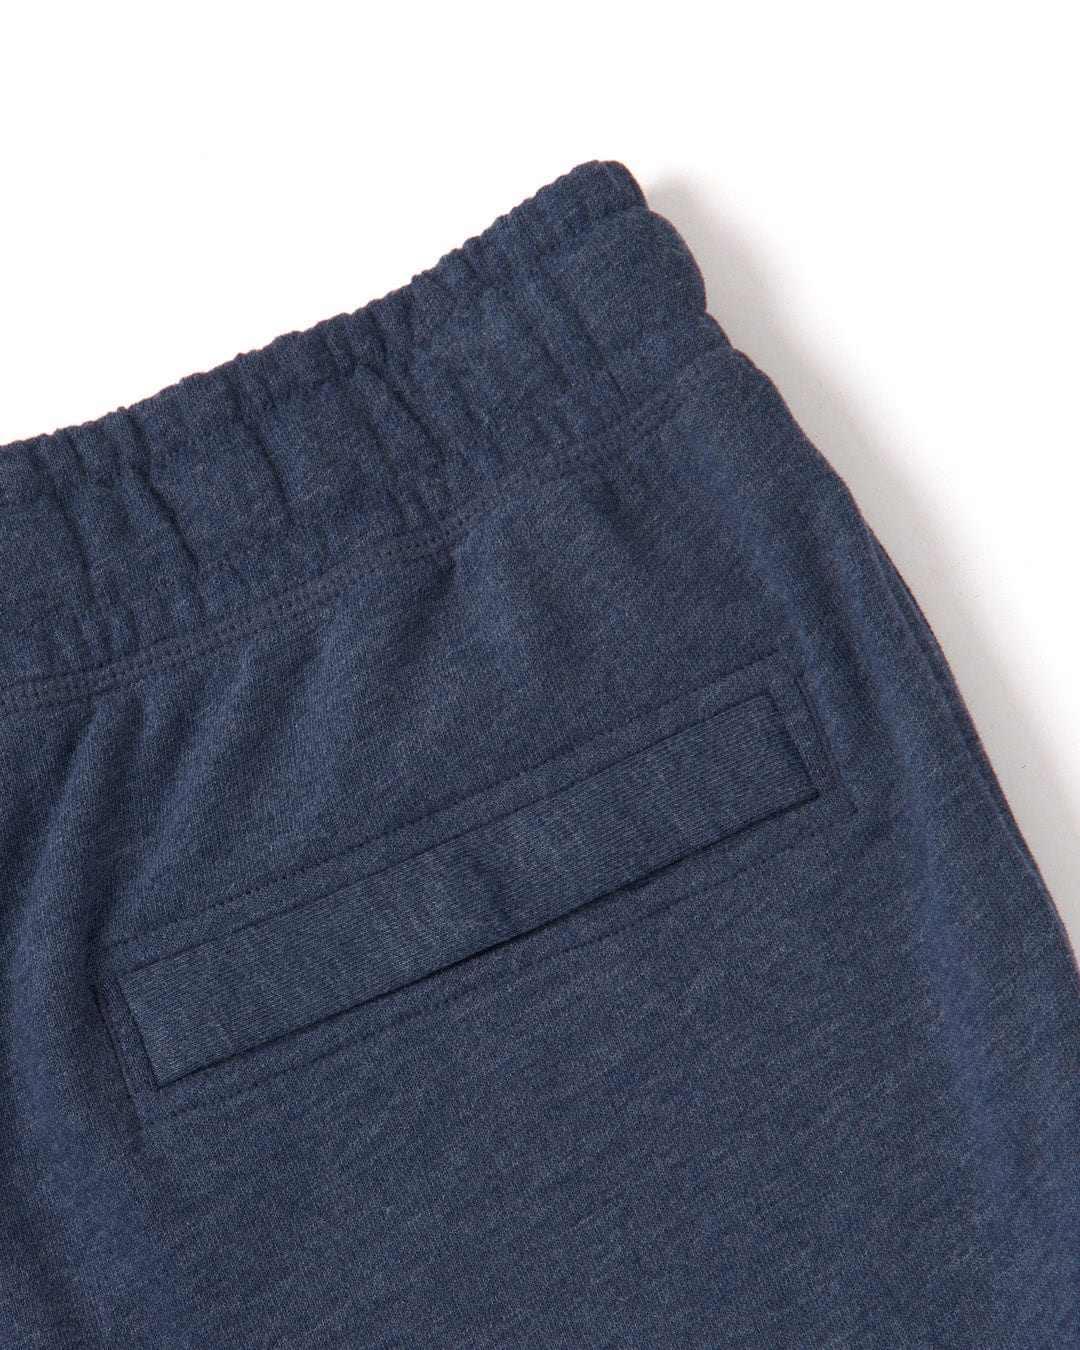 The back pocket of a Saltrock Original - Mens Short - Blue Marl made from comfortable jersey material.